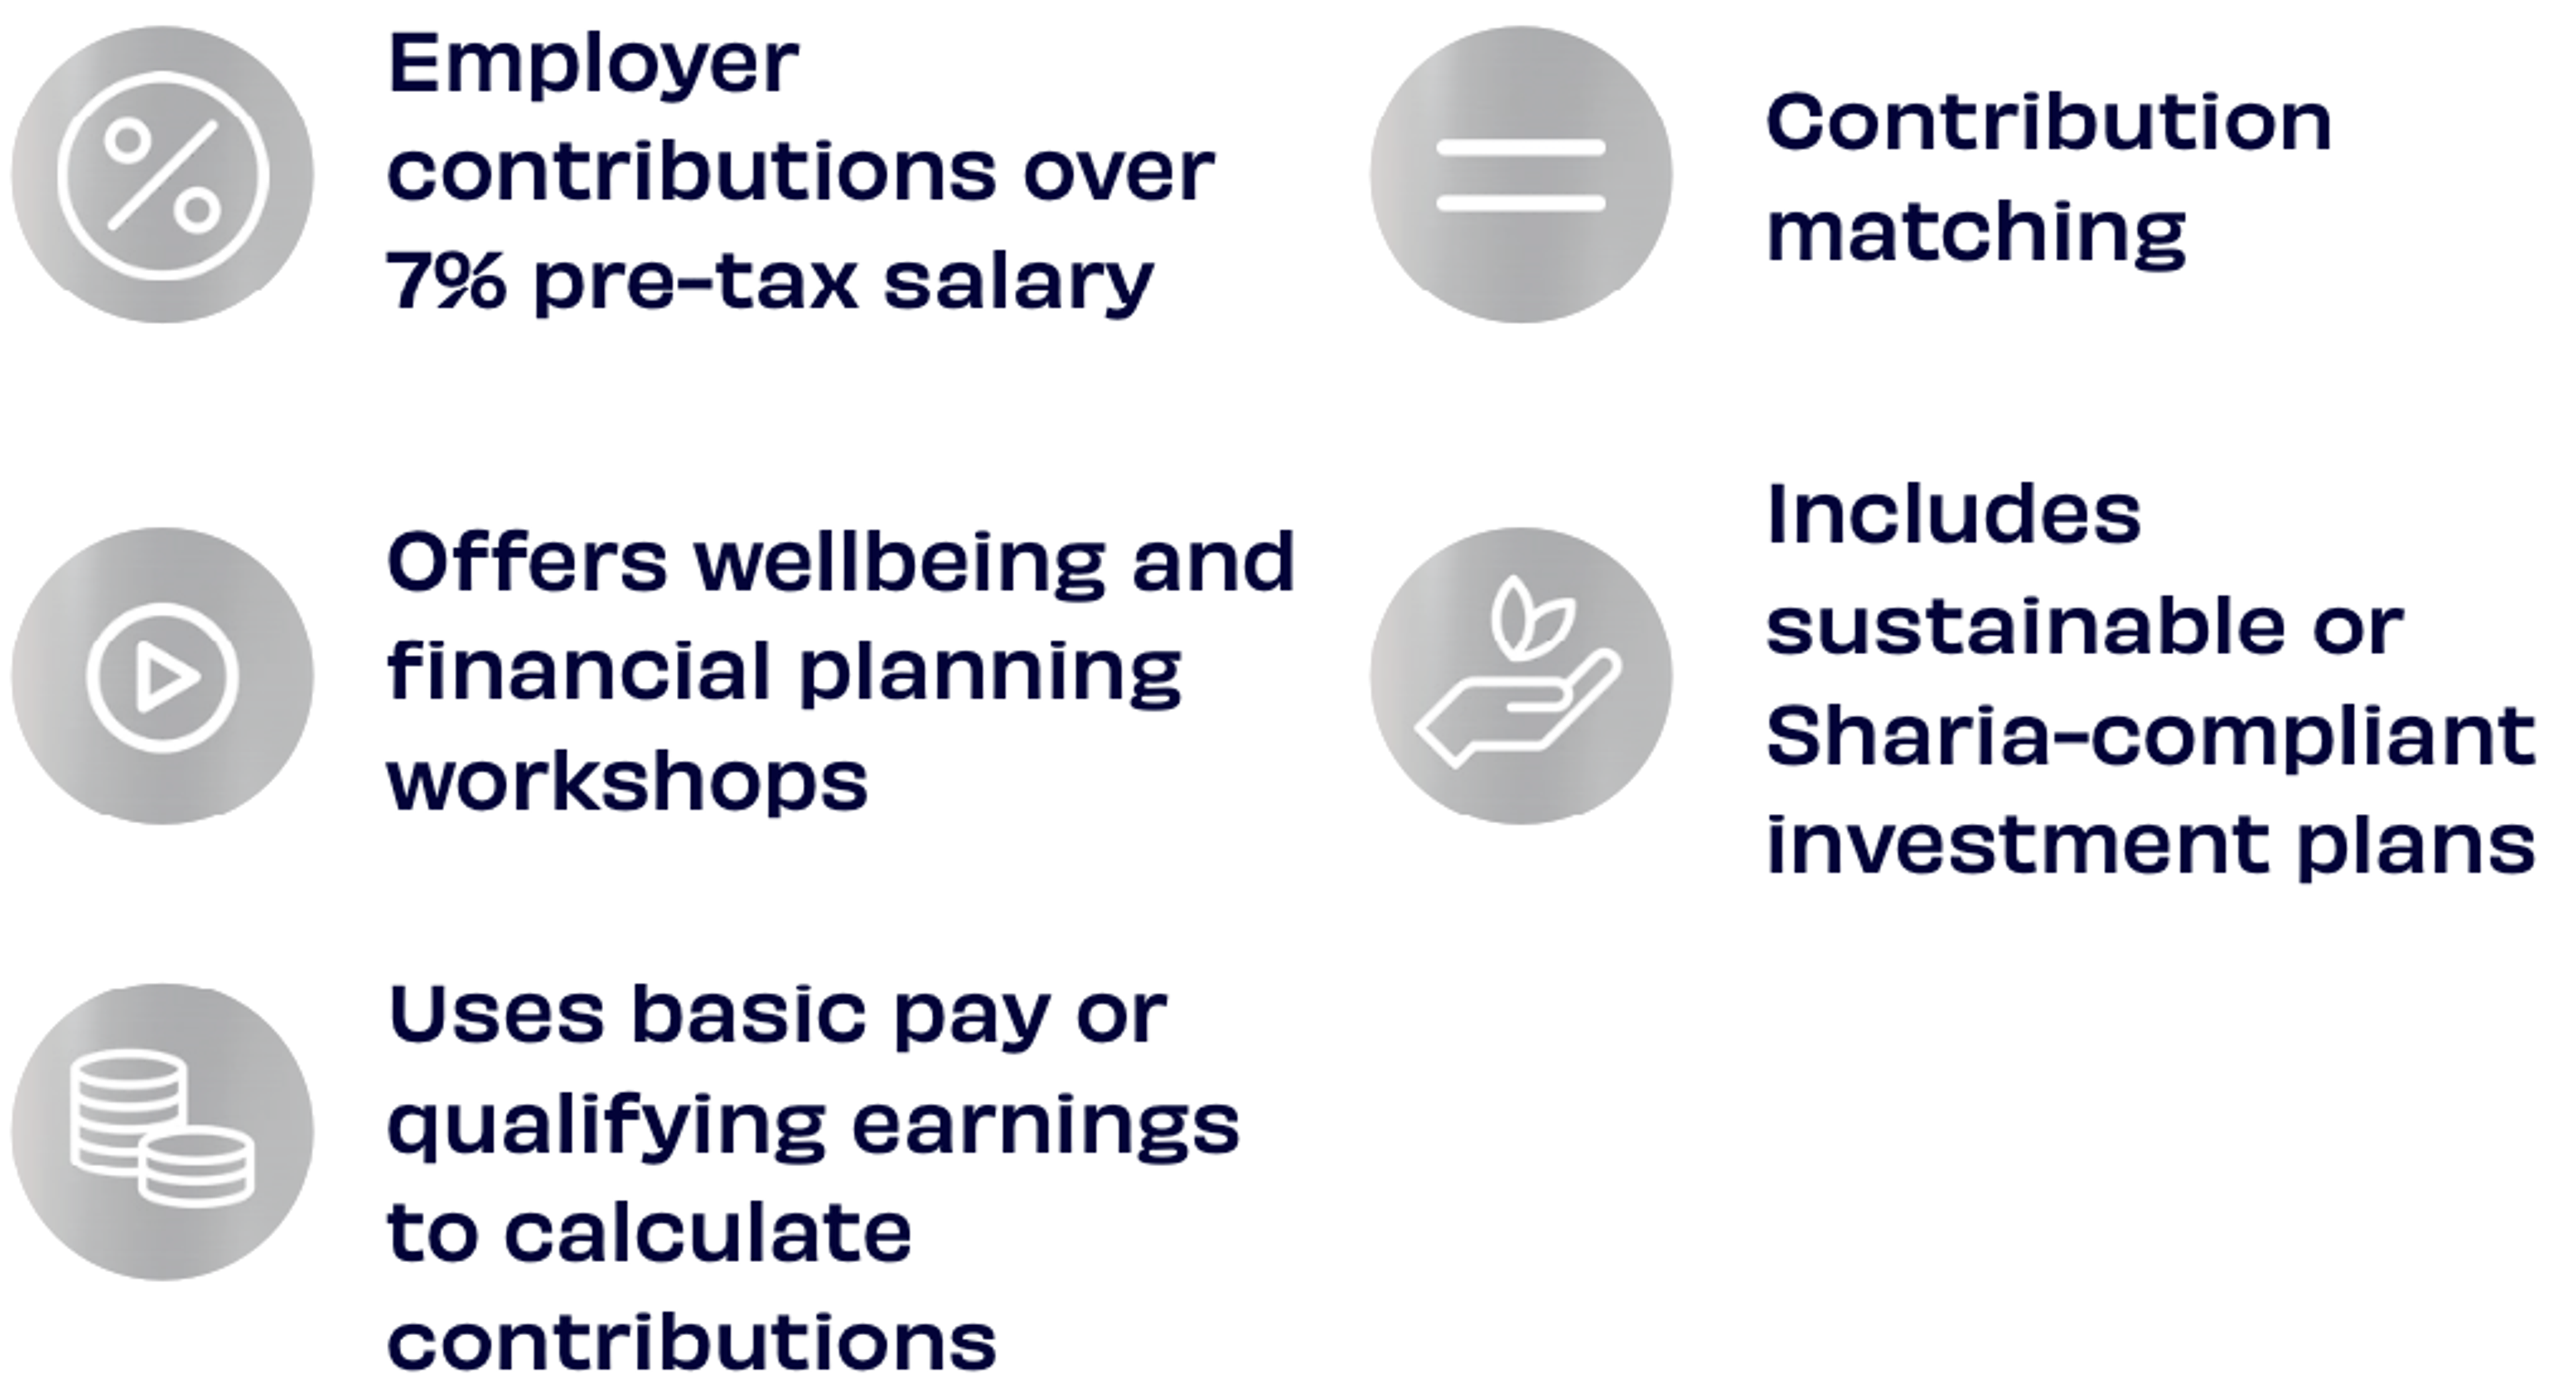 A graphic showing contributing factors to a silver level workplace pension scheme